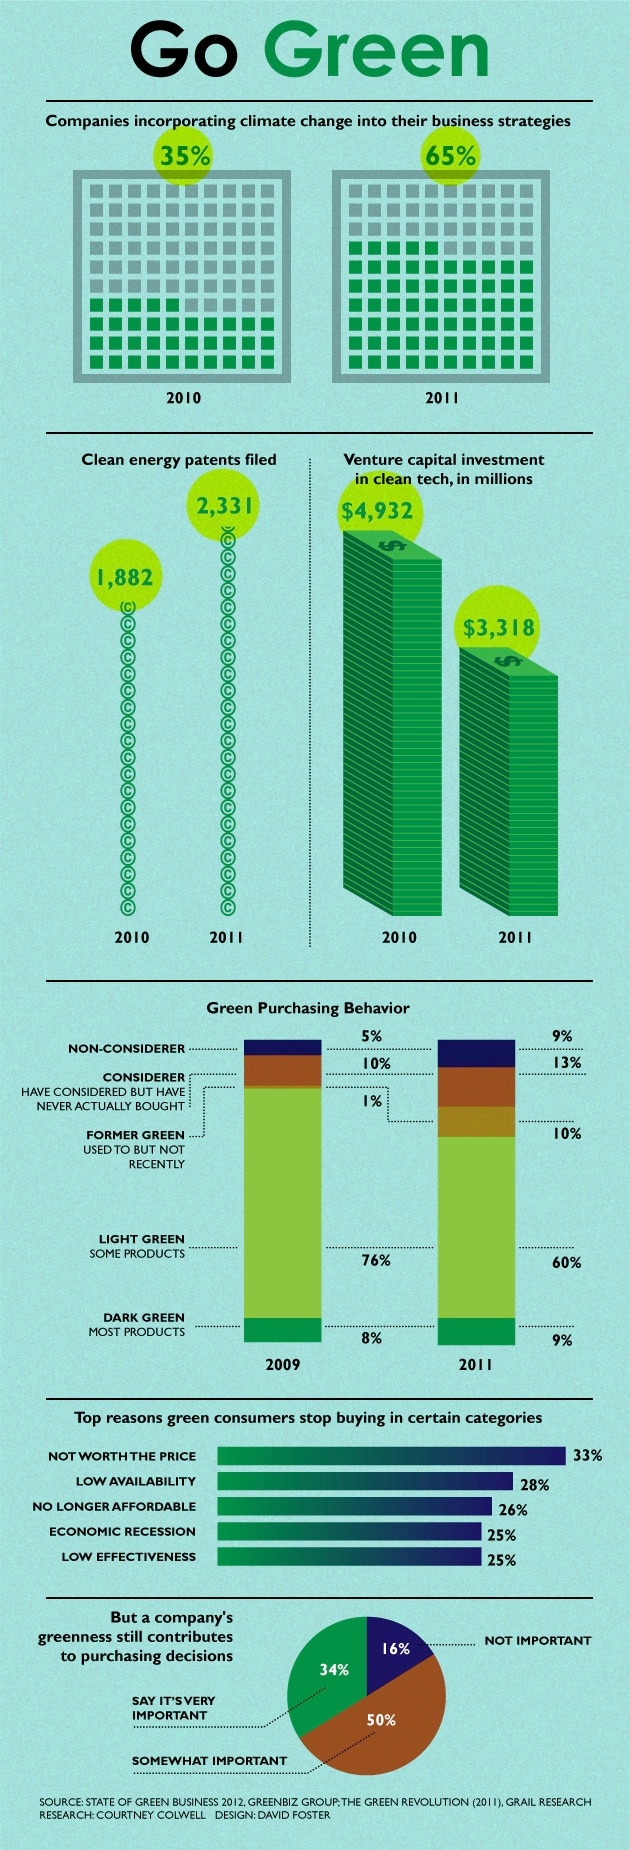 Going Green: Trends Among Businesses, Consumers